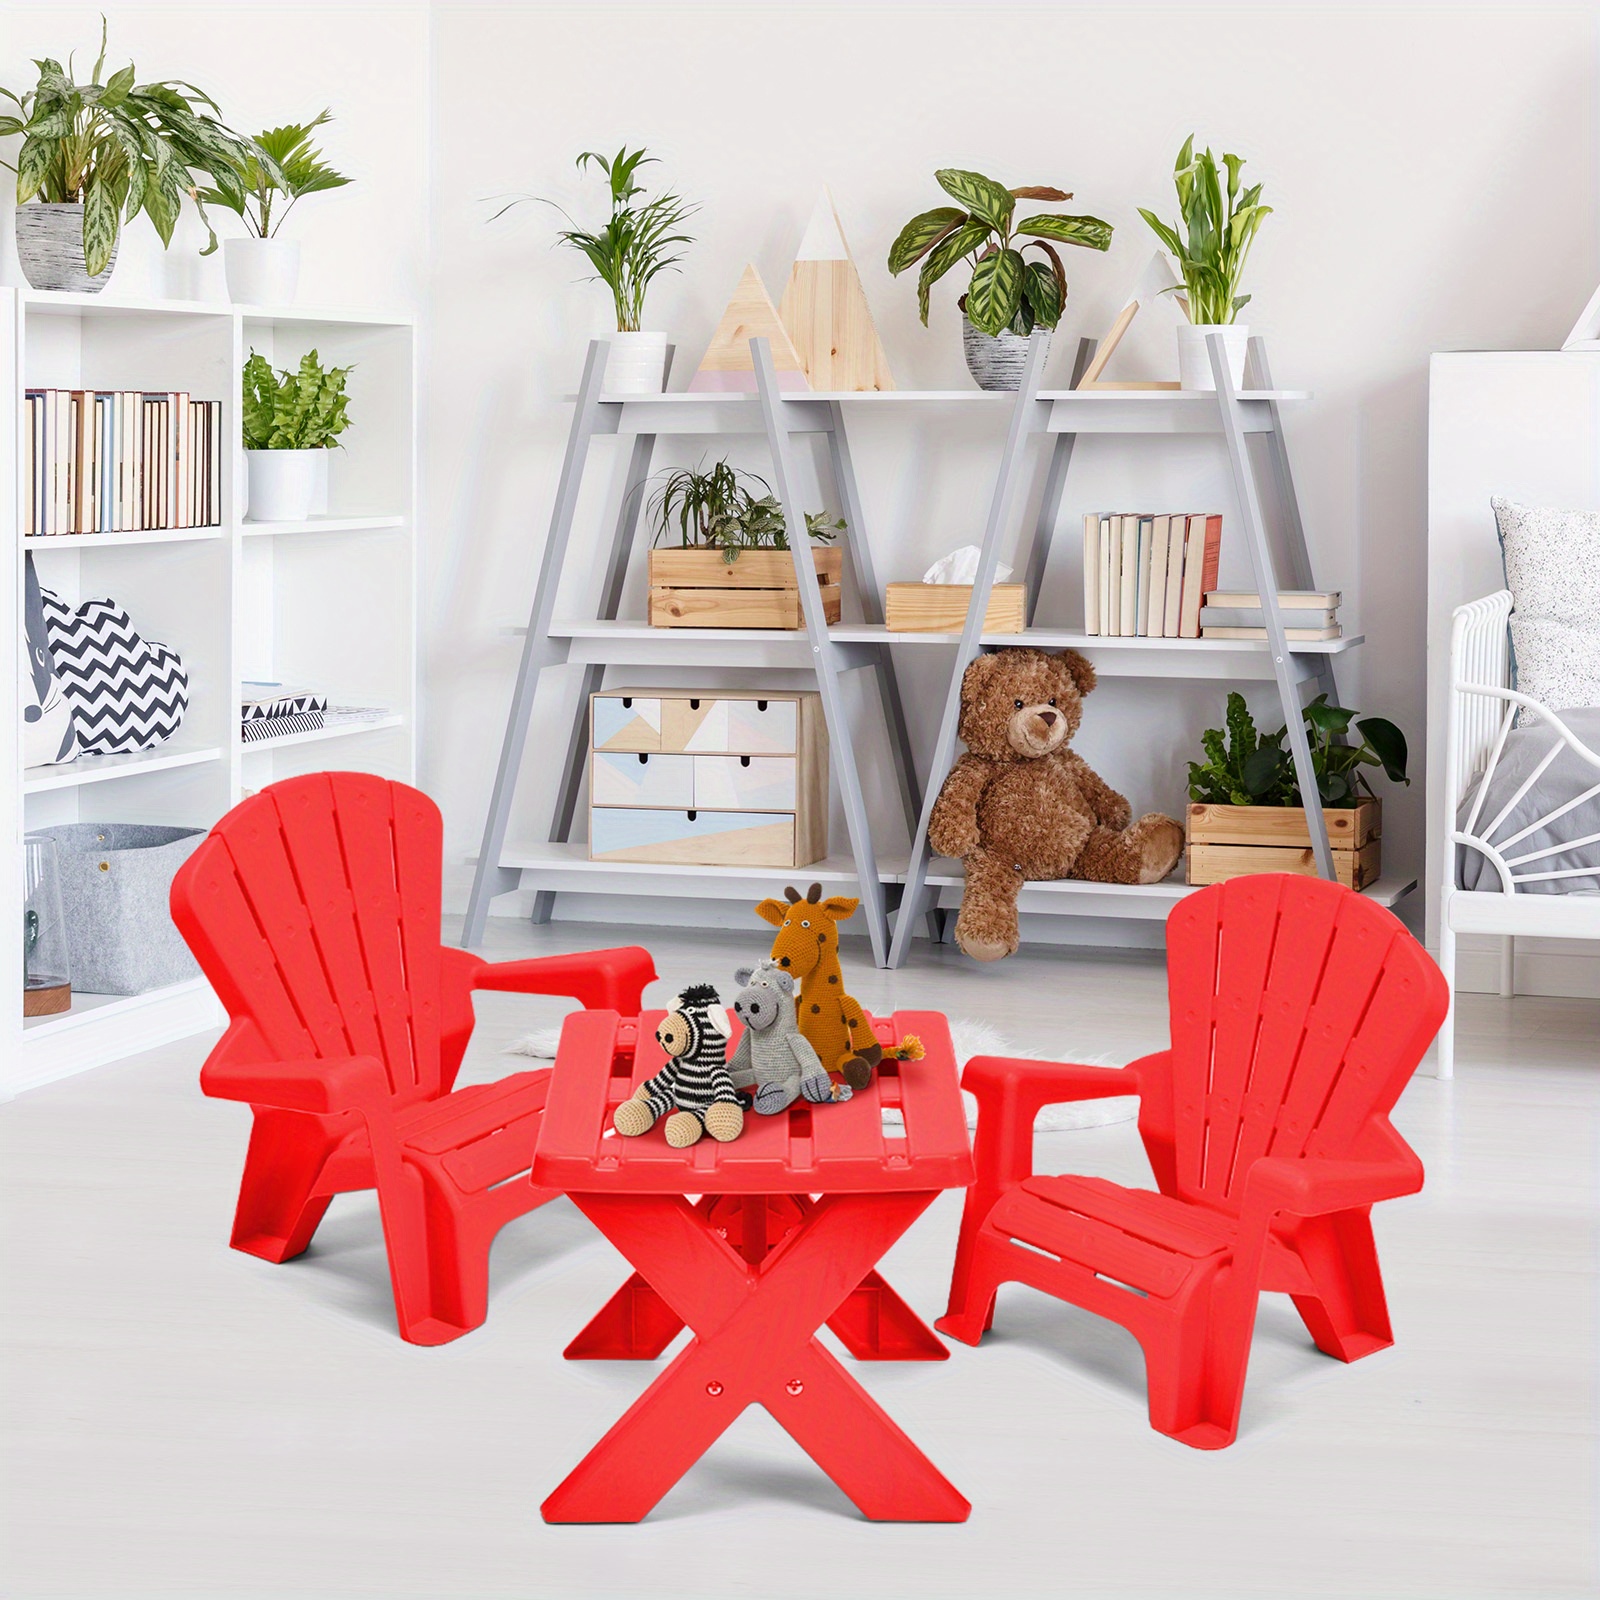 

Lifezeal 3 Pcs Kids Table &chair Set Plastic Children Studying Play Table Classroom Red